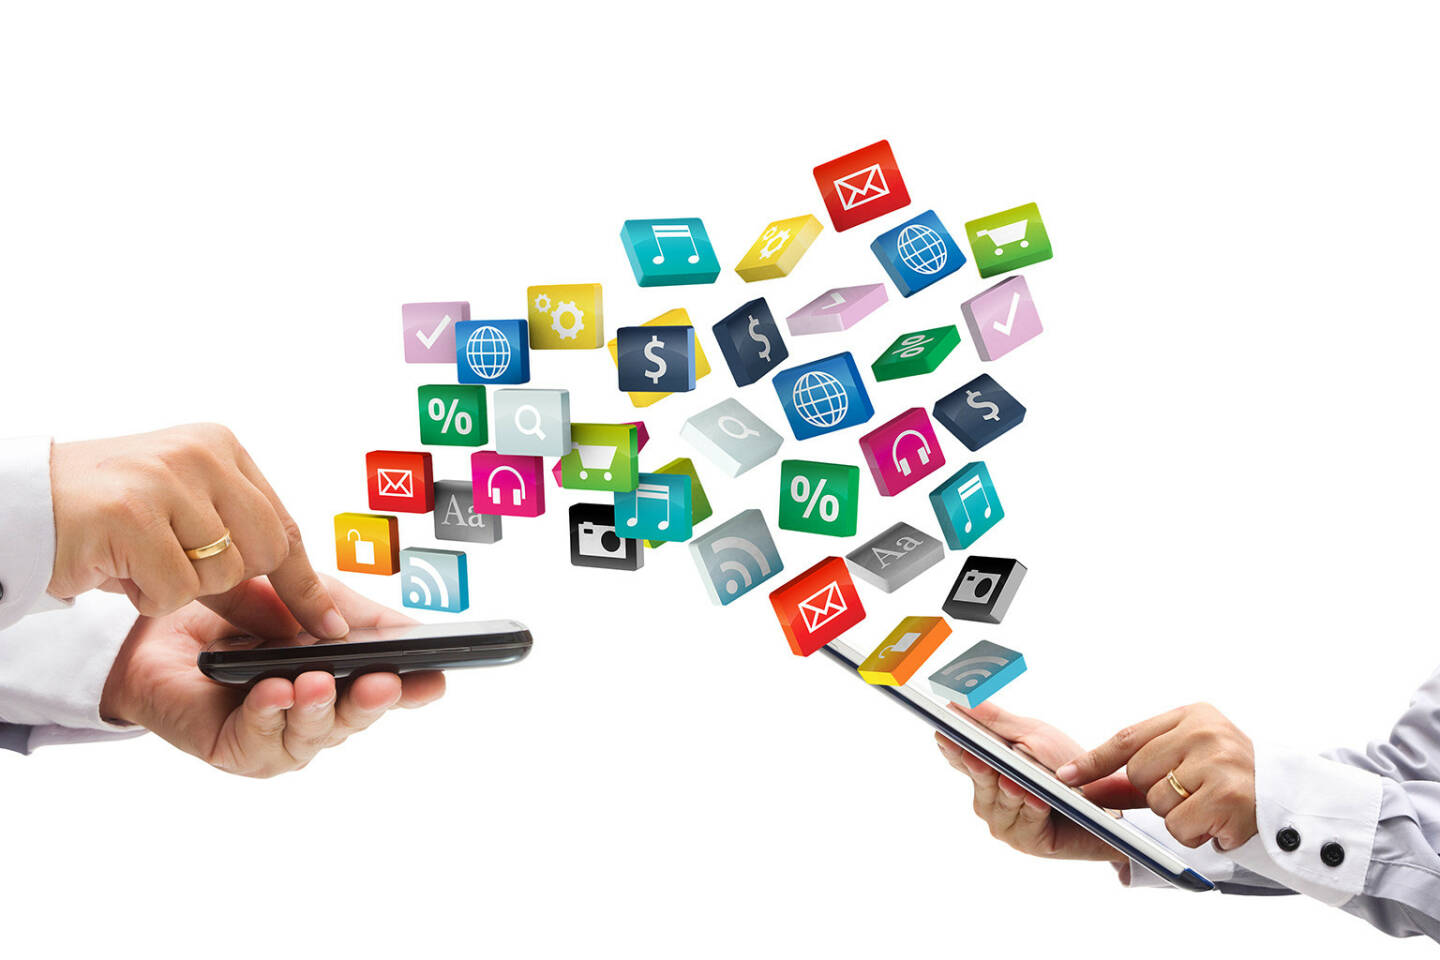 Smartphone, Tablet, Apps, Icons, http://www.shutterstock.com/de/pic-115239742/stock-photo-colorful-application-icons-with-hand-holding-the-phone-and-tablet-pc-isolated-on-white-background.html